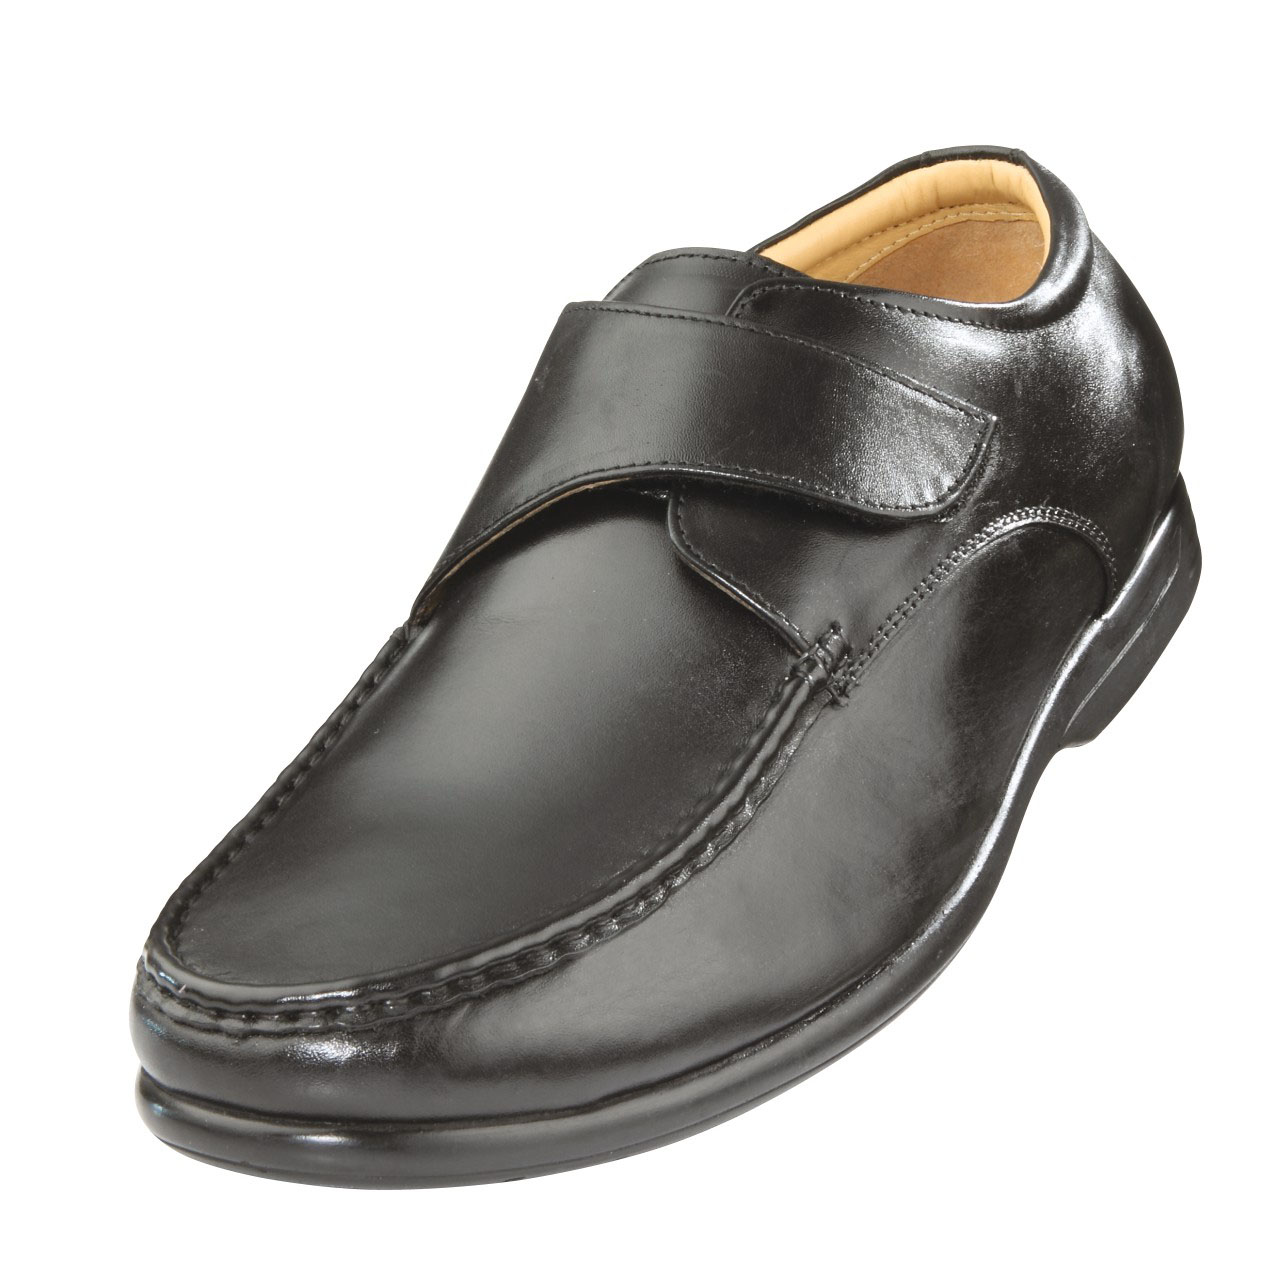 Extra-Wide Men's Leather Adjustable Touch-Close Shoes